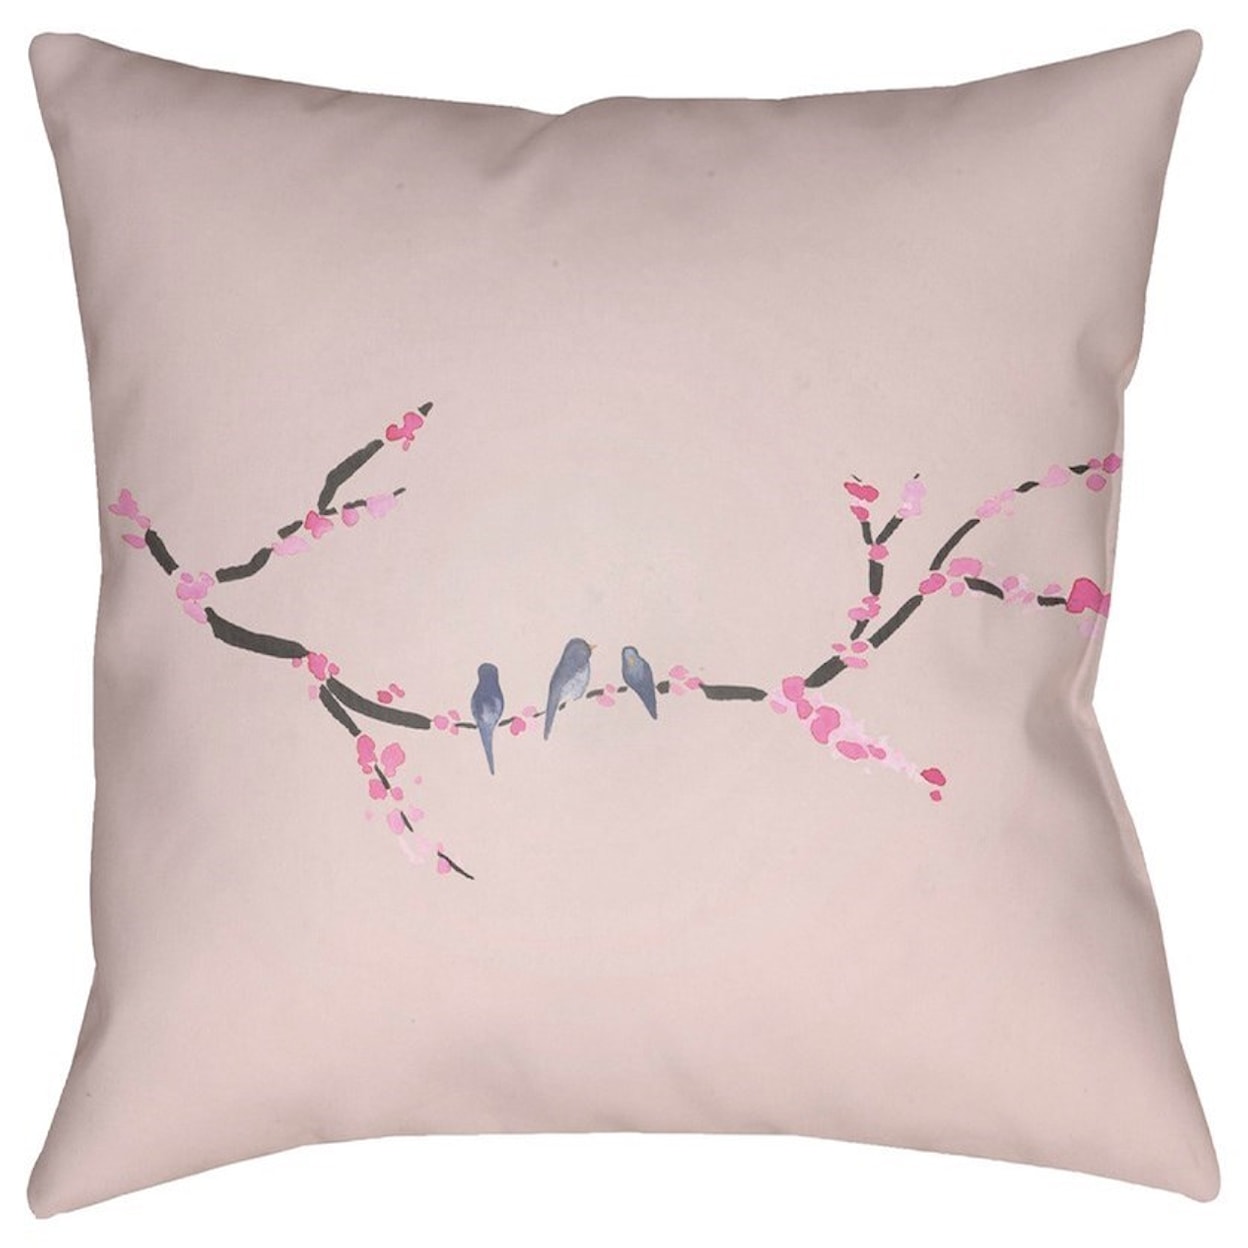 Surya Cherry Blossoms 18 x 18 x 4 Polyester Throw Pillow